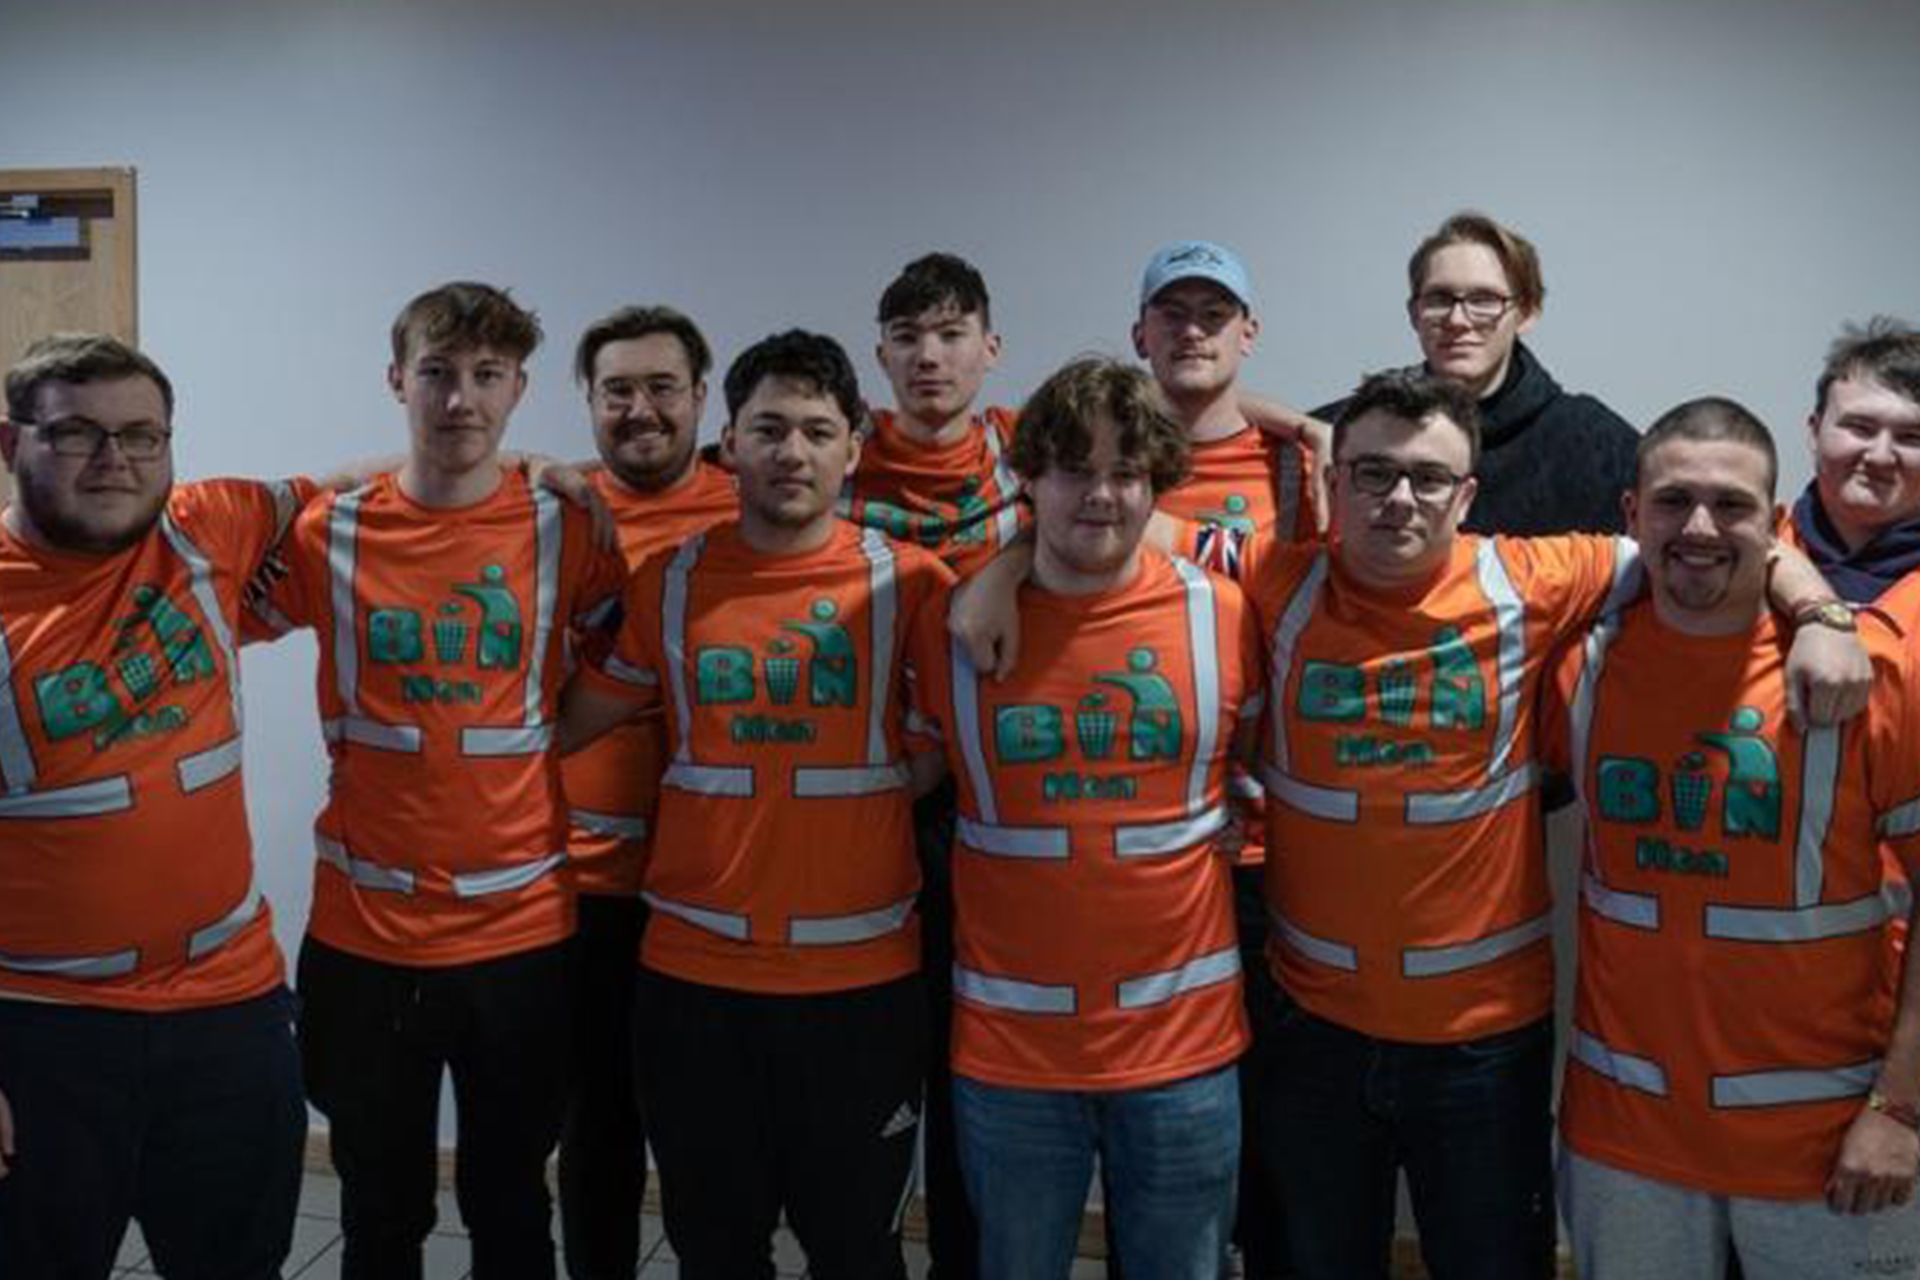 The Binmen group with their arms around each other.